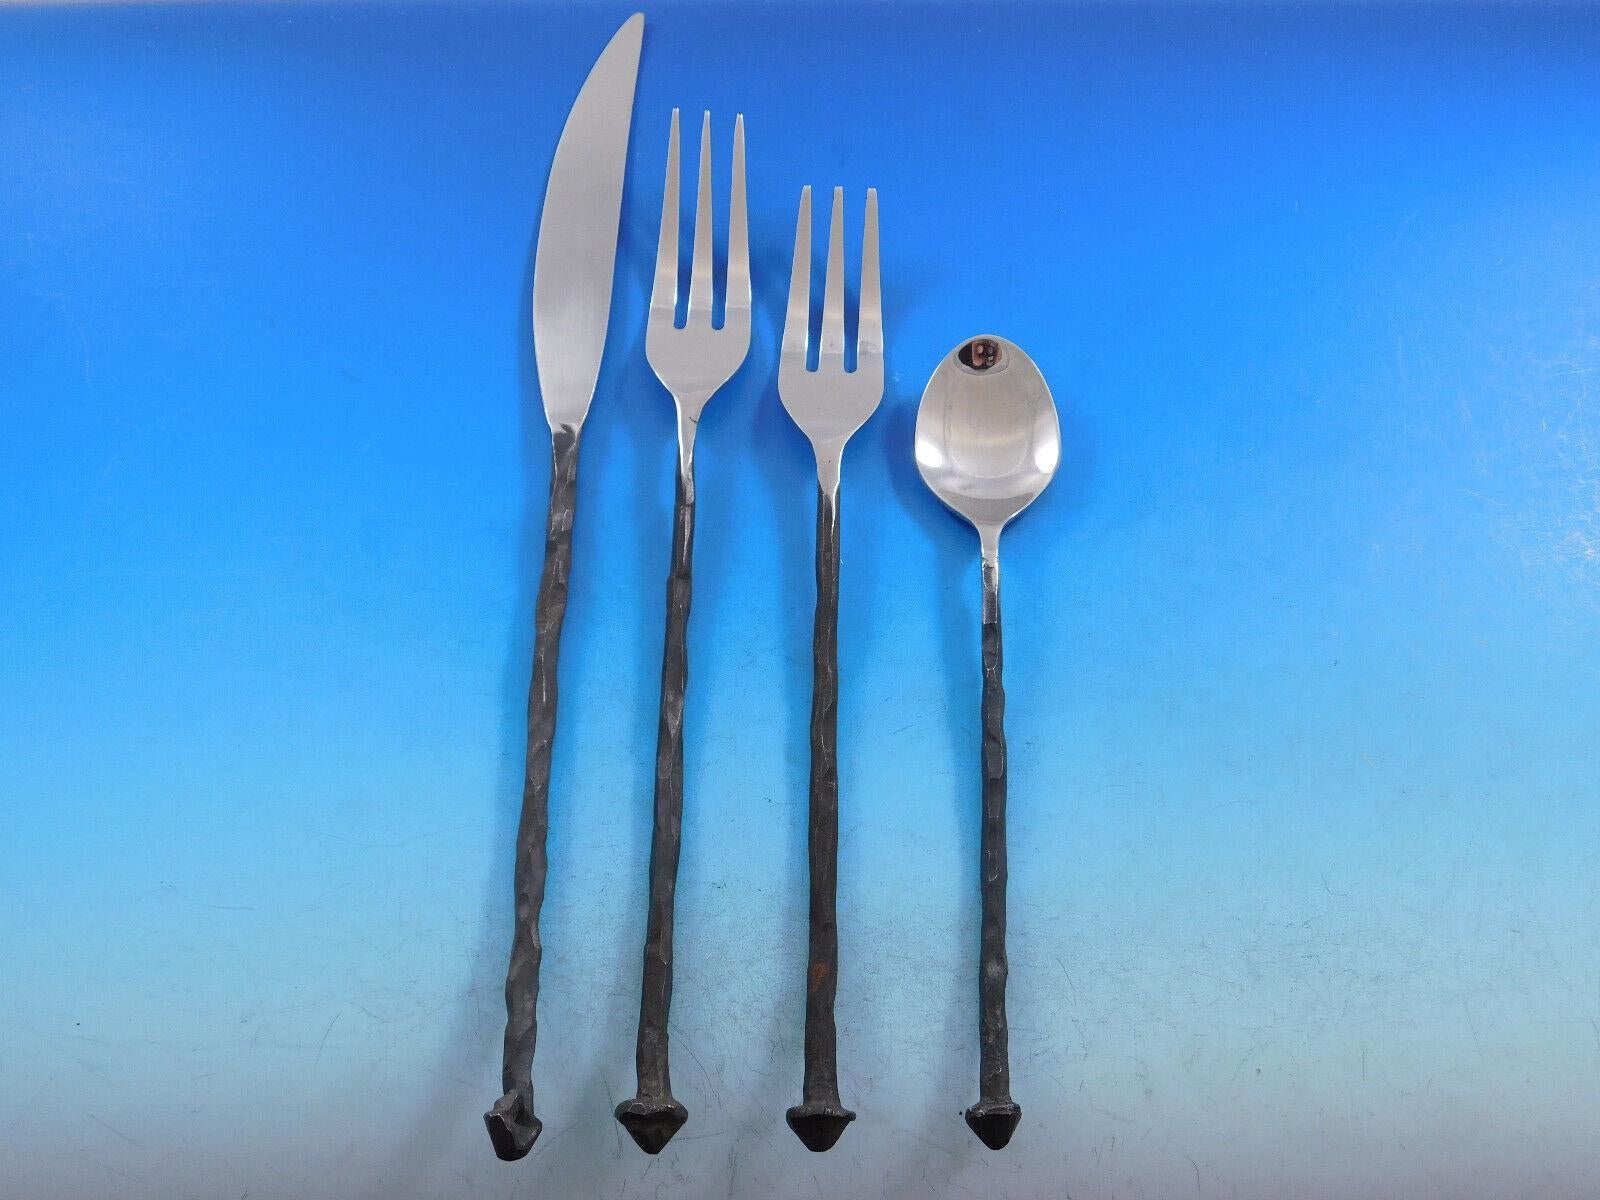 Iron Age by Michael Aram


“Flatware that's not flat: Design and Production of innovative Table cutlery, 1890-2015” By William P. Hood Jr. & Phil Dreis. (Not pictured in the book) This set is from the authors' incredible lifetime collection of